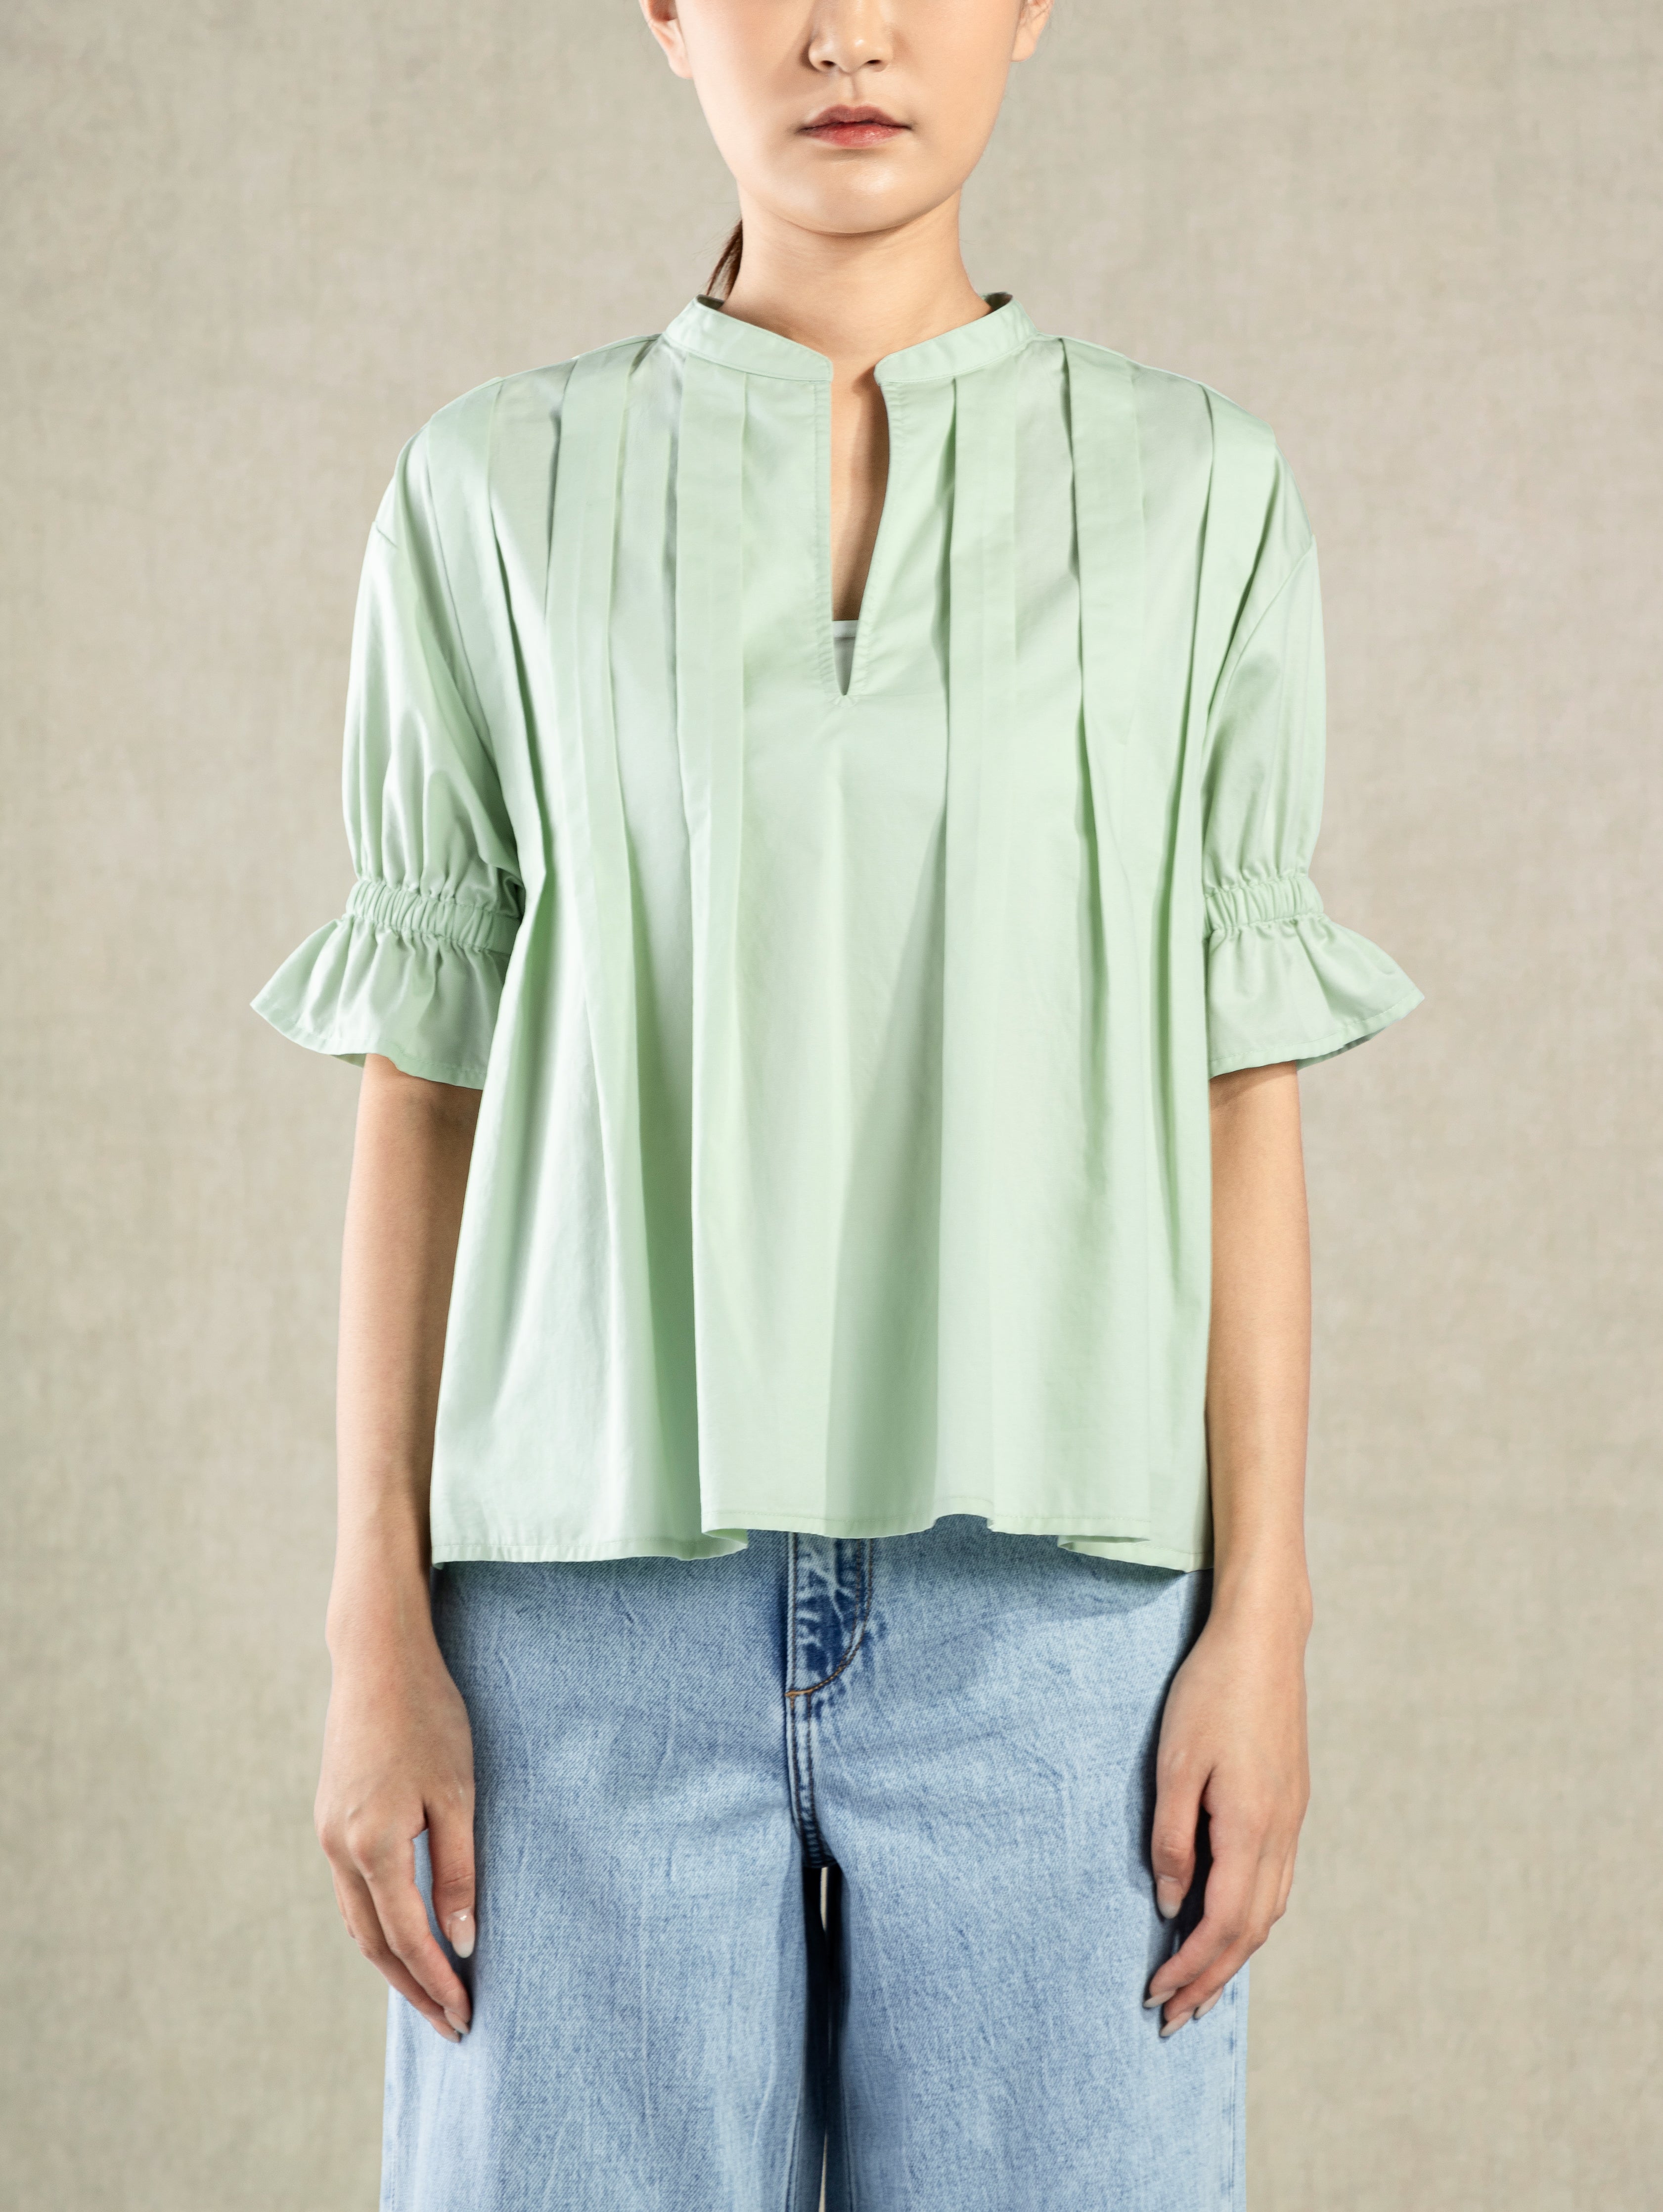 Ocean Wave Pleated V-neck SS Blouse Womens Lightweight Pleated Top